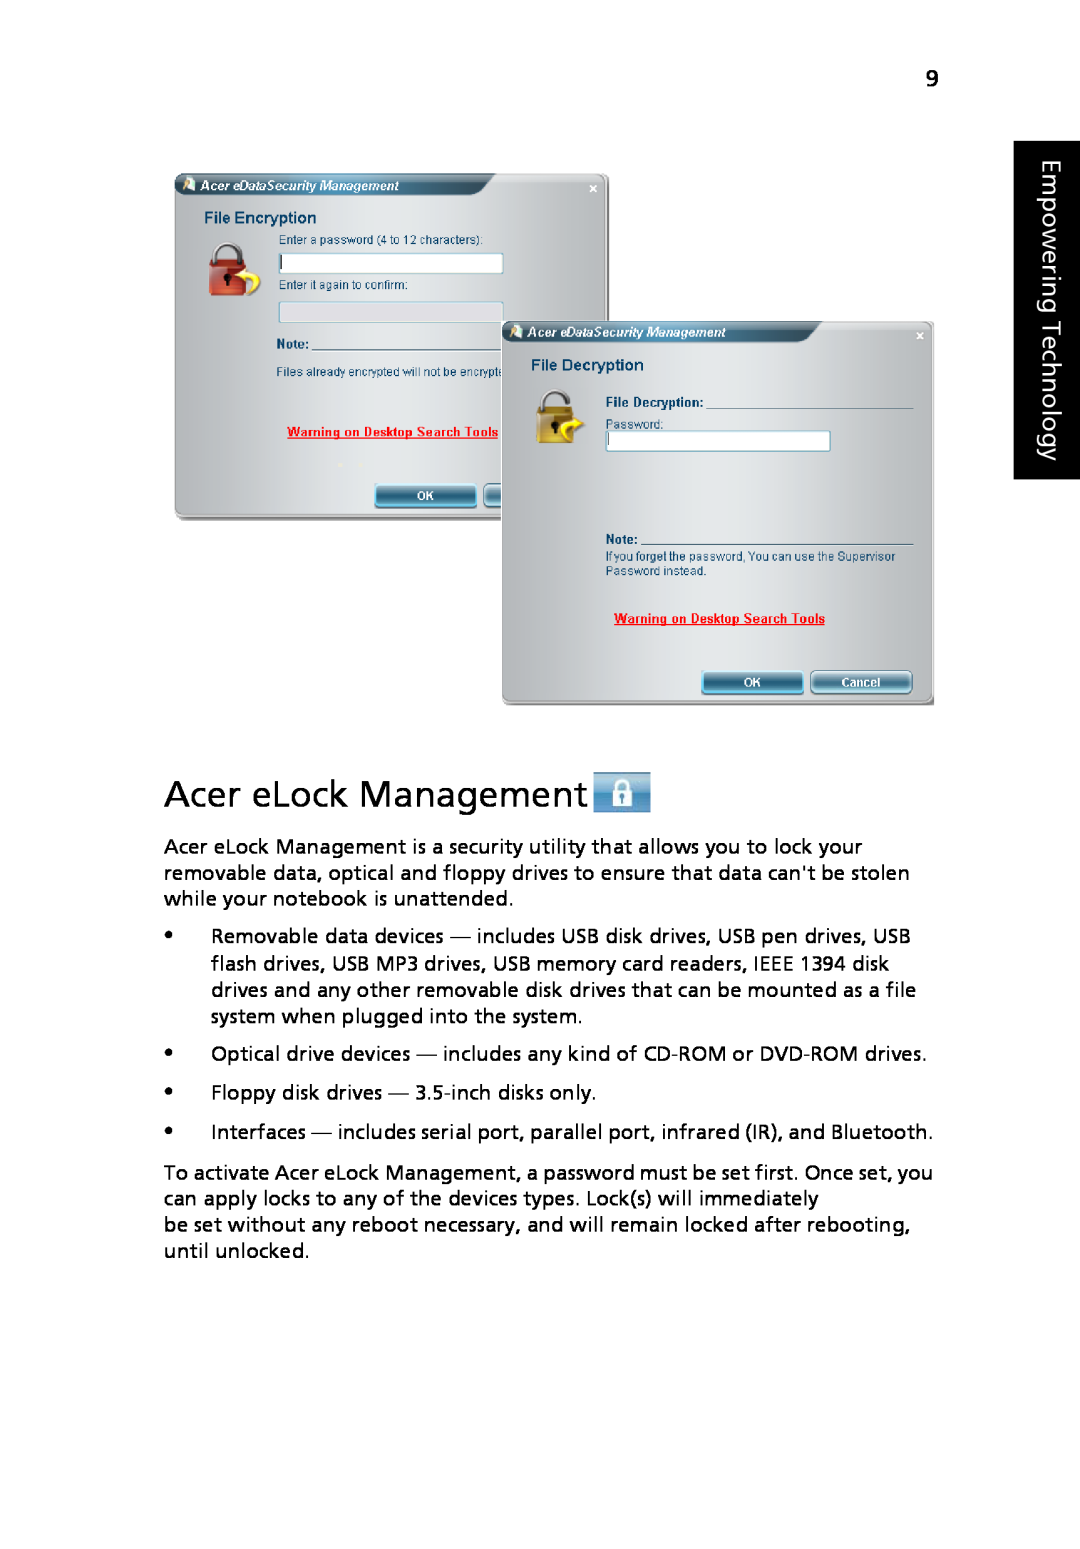 Acer 3040 Series, 3030 Series manual Acer eLock Management, Empowering Technology 